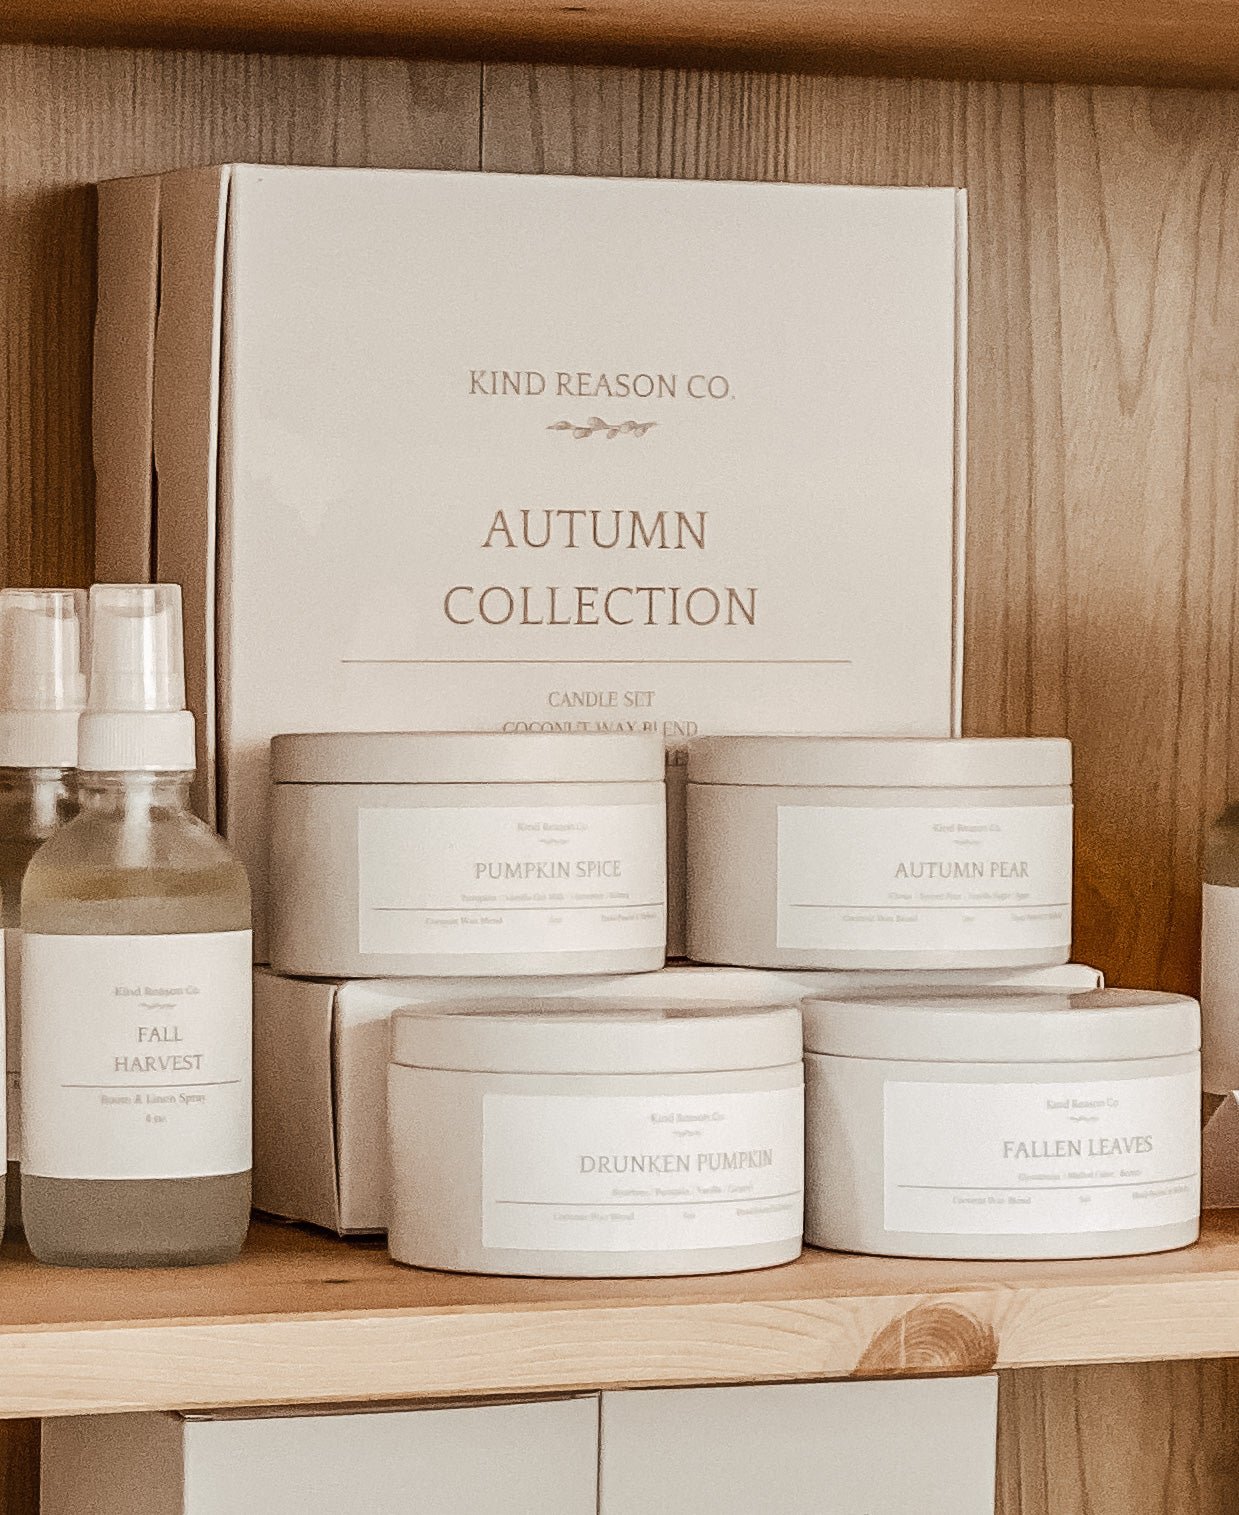 The Autumn Collection Box - Kind Reason Co.